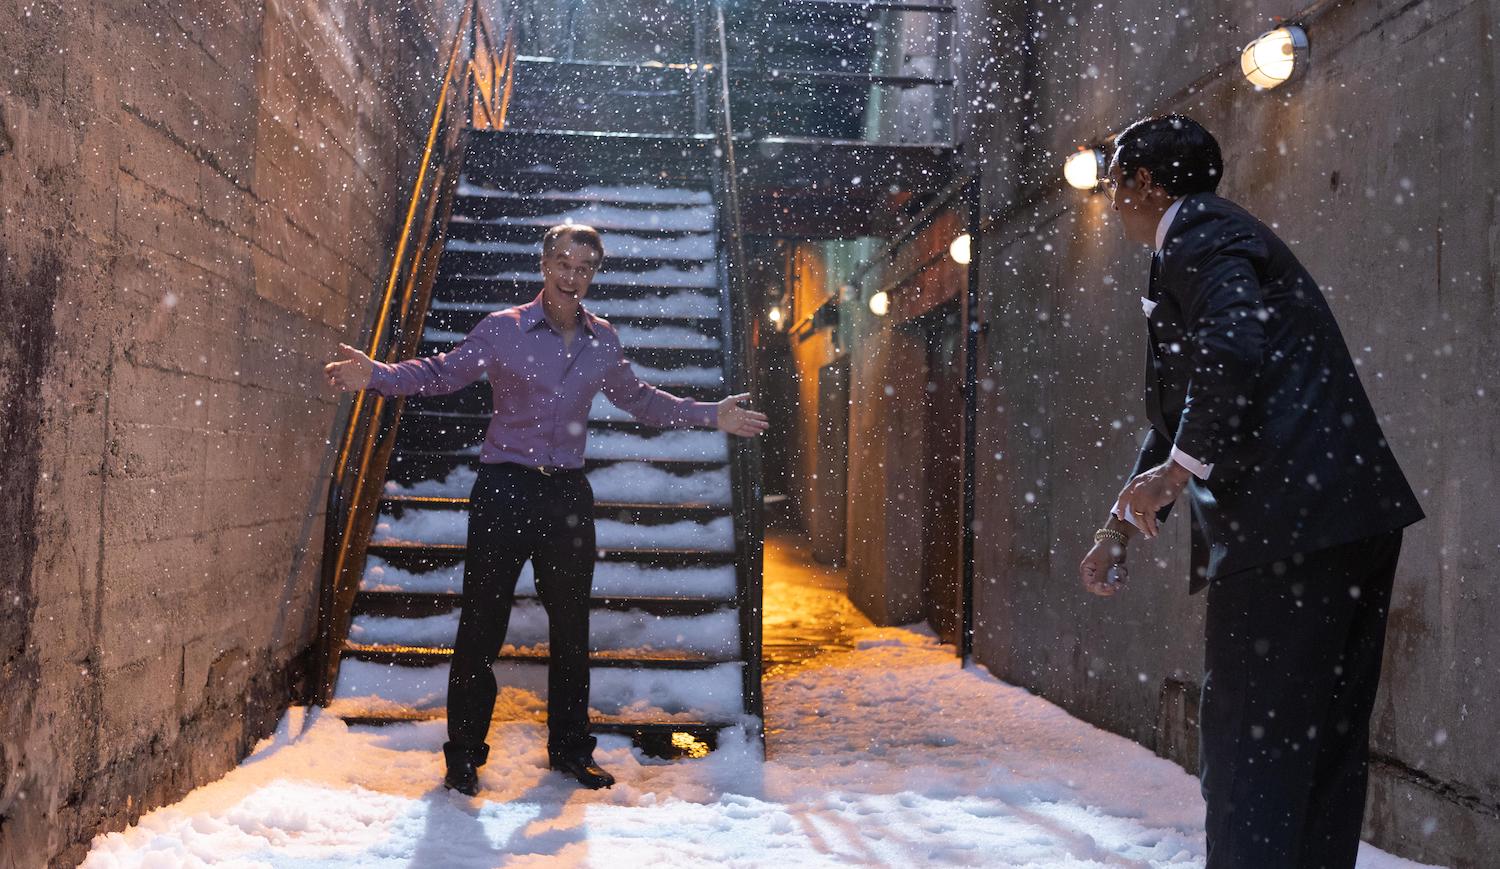 'Welcome to Chippendales' Episode 5 shows Murray Bartlett as Nick de Noia and Kumail Nanjiani as Steve Banerjee have a snowball fight as seen here.